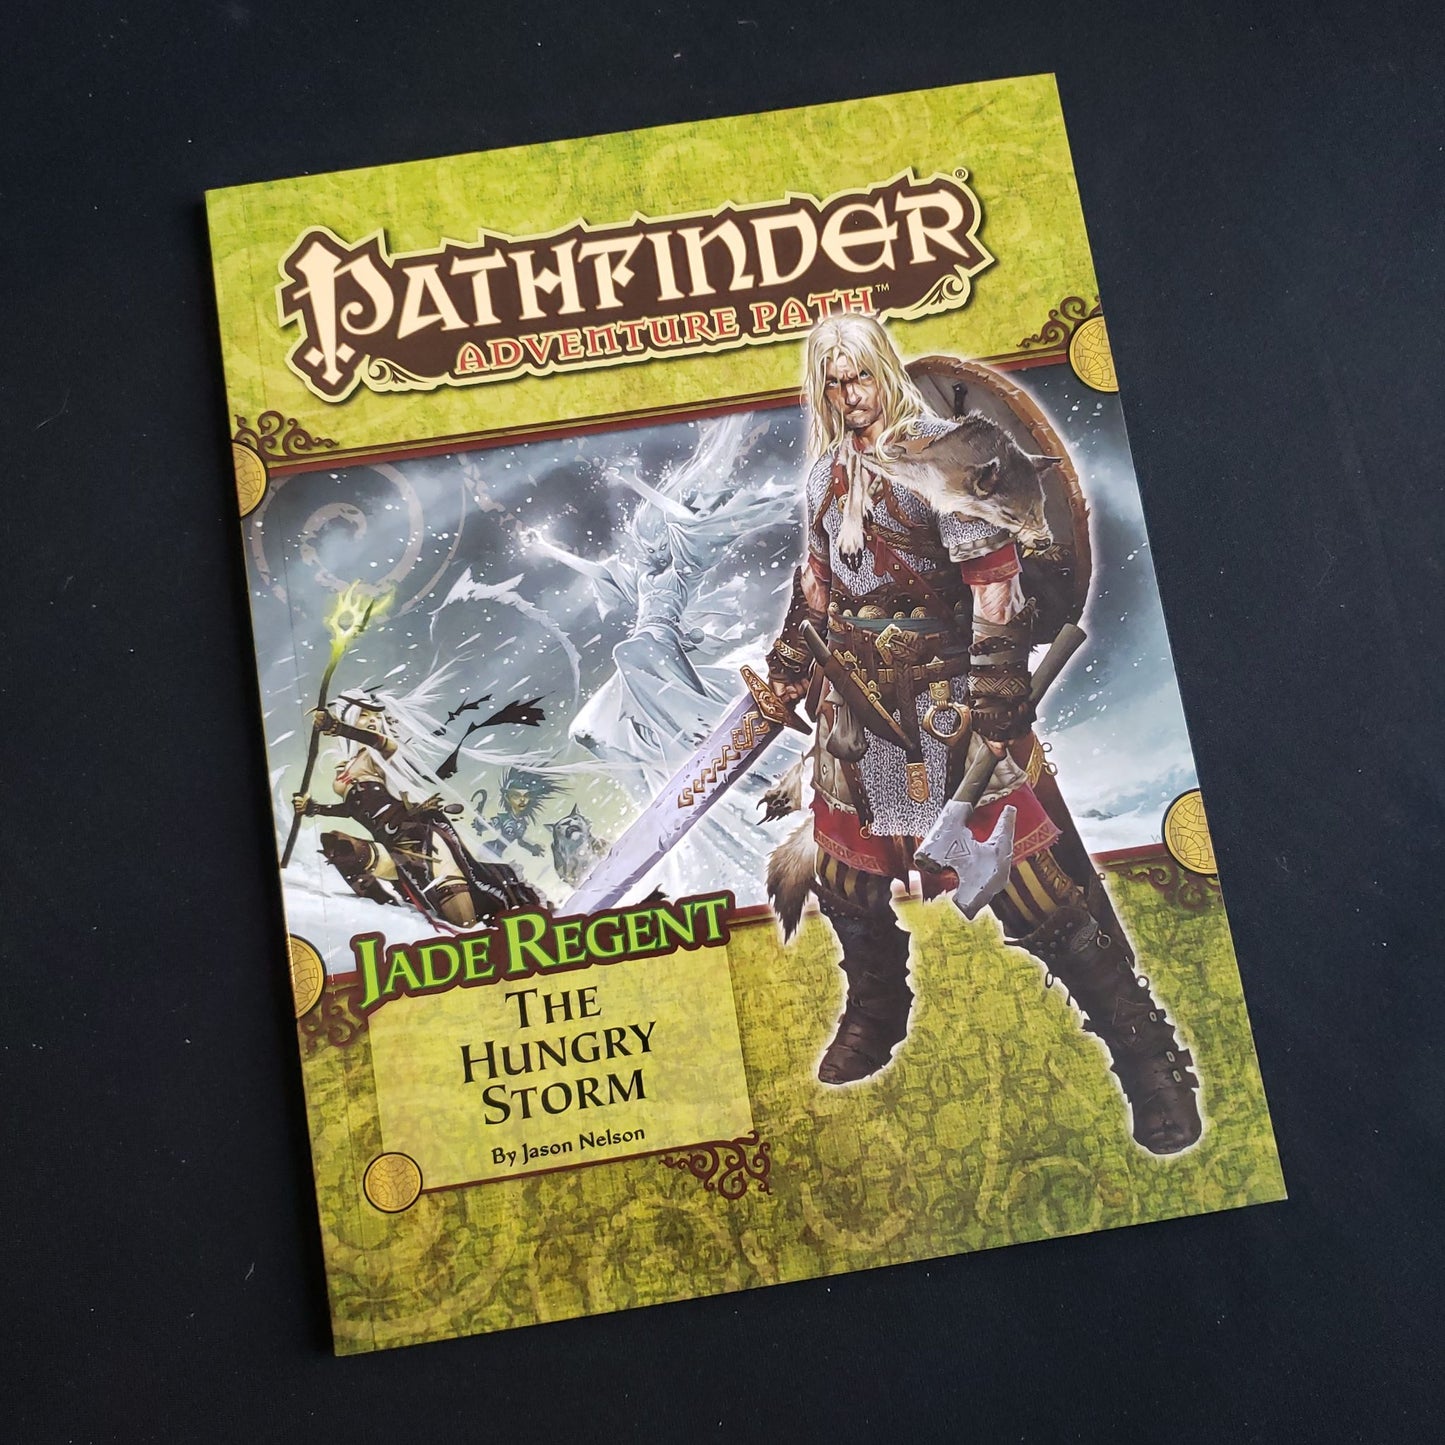 Image shows the front cover of the Hungry Storm book for the Pathfinder First Edition roleplaying game